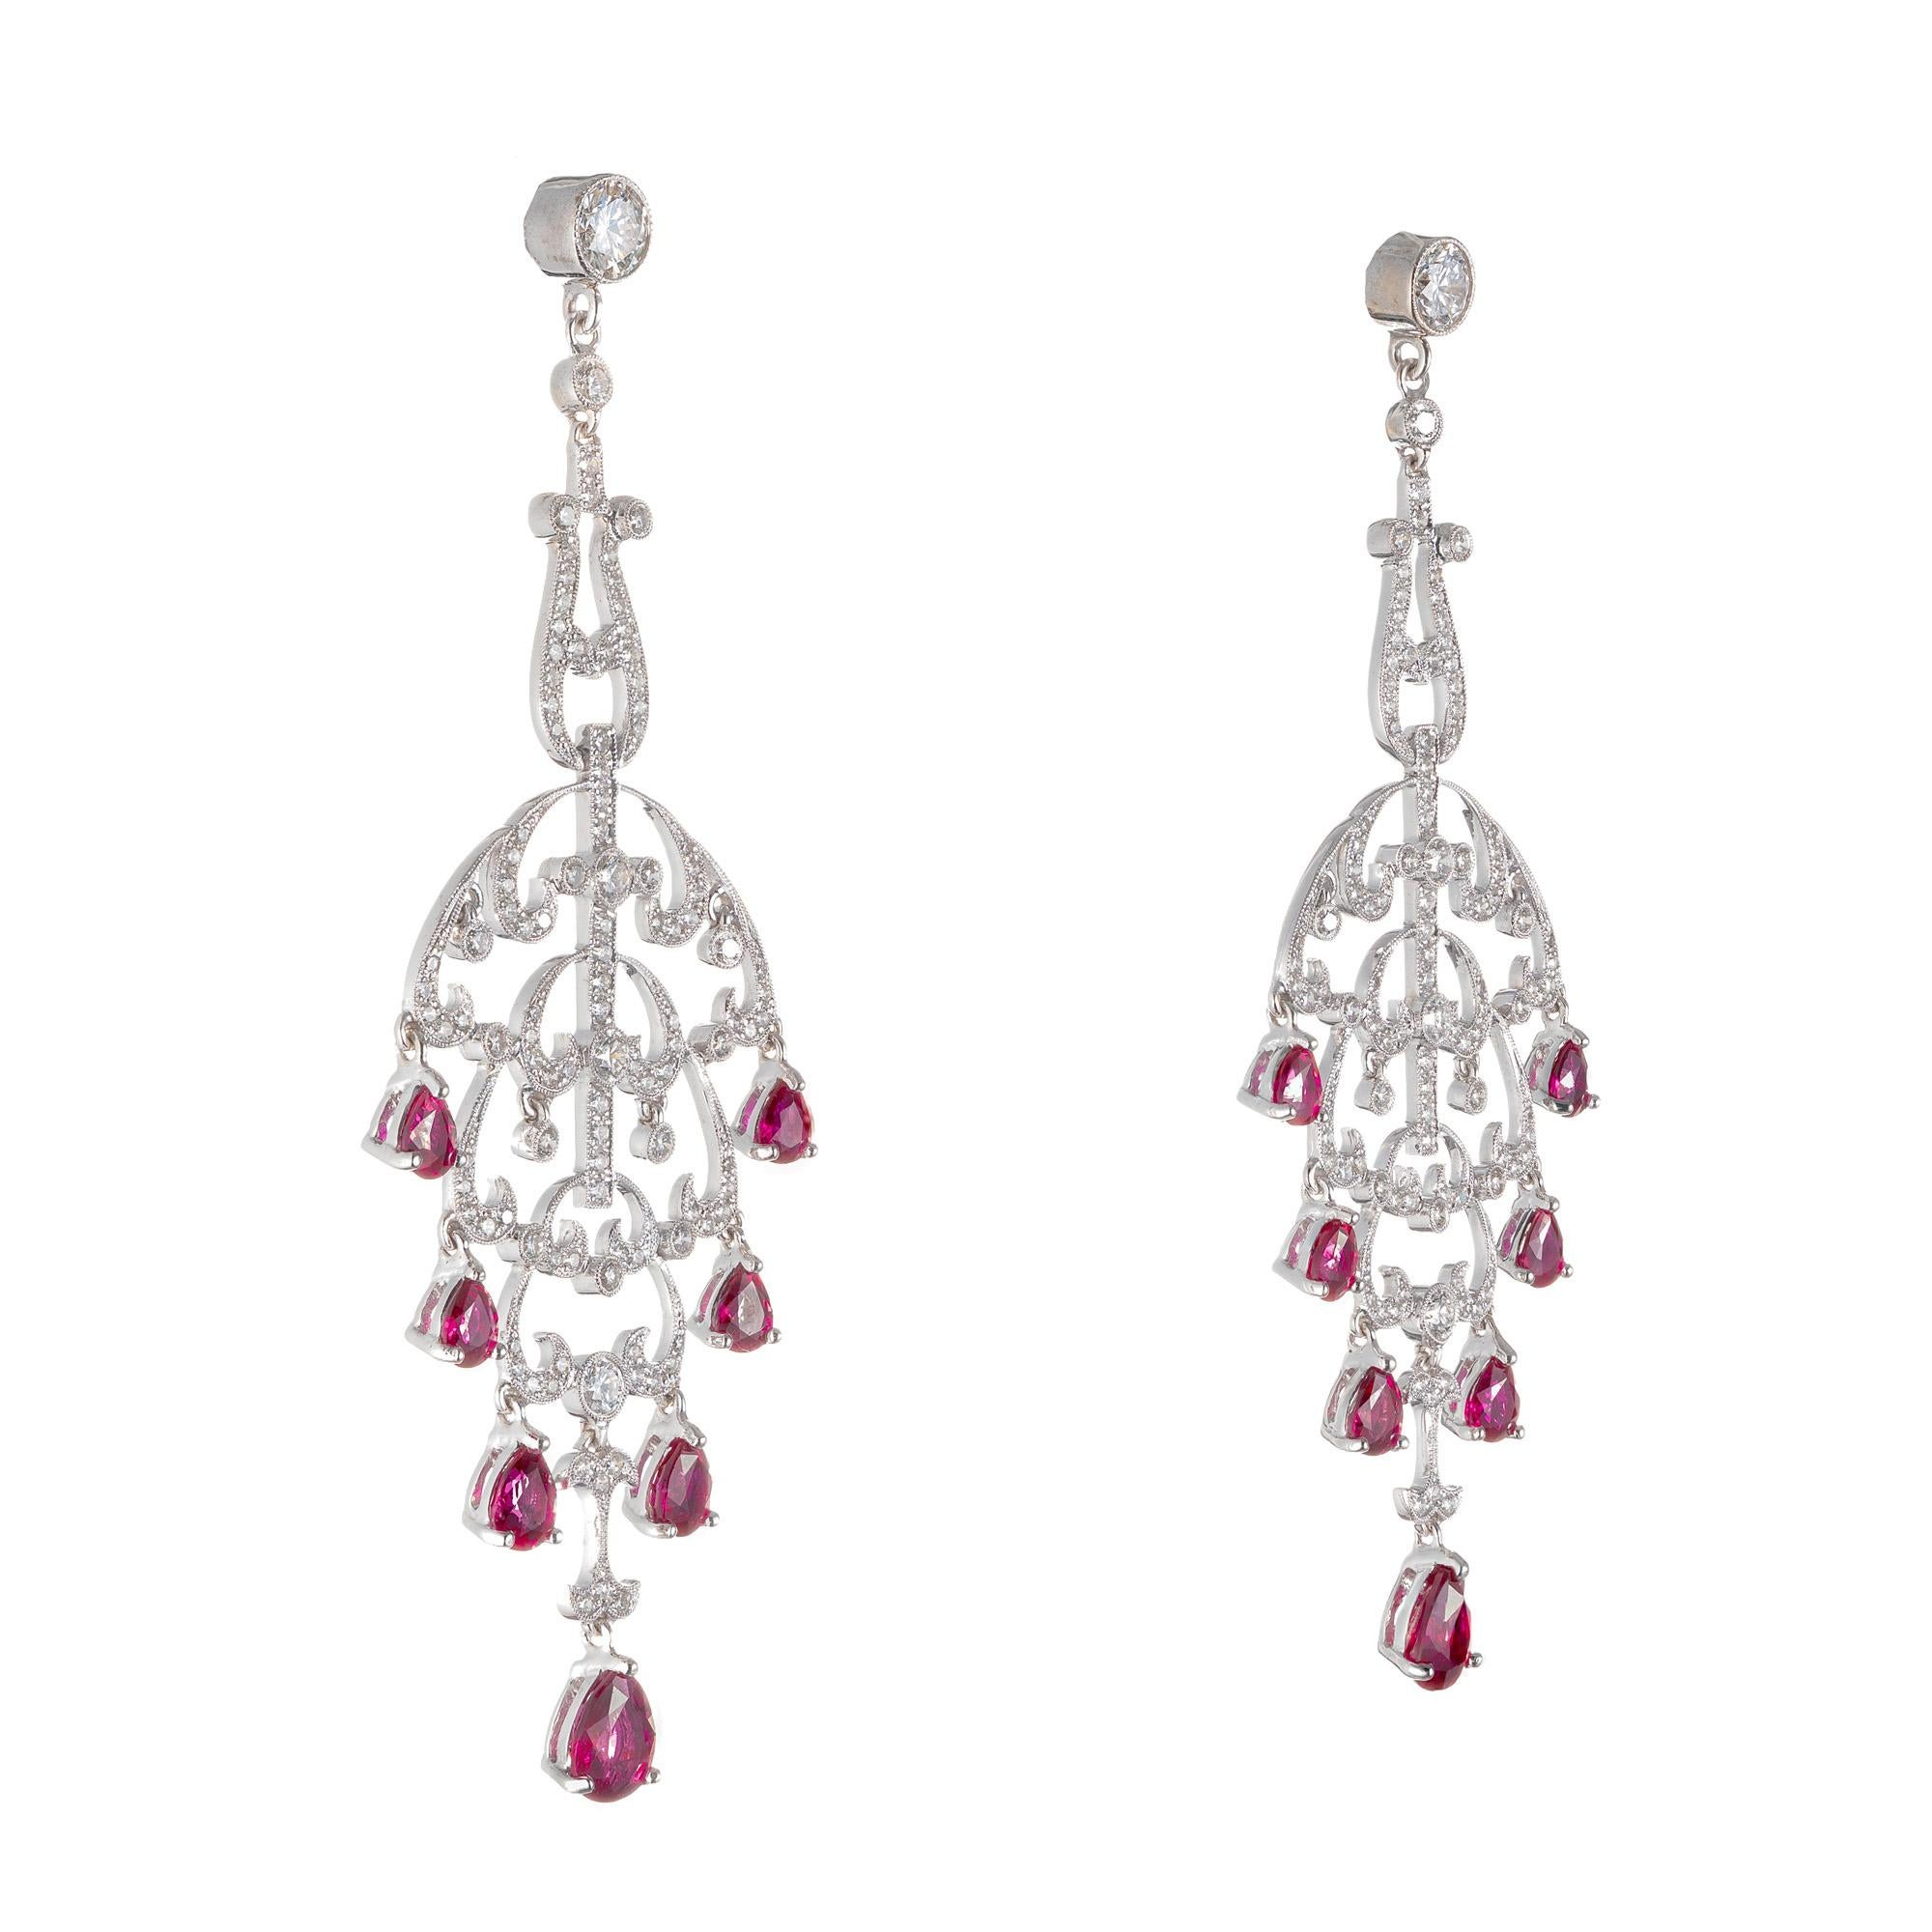 circa 1940-1950. Hand bead set and top gem red natural  no heat certified Rubies. One Ruby on each earring was GIA random tested. Both tested natural .14  matched custom cut bright pear shaped Rubies. 220 full cut diamonds. The earrings themselves,